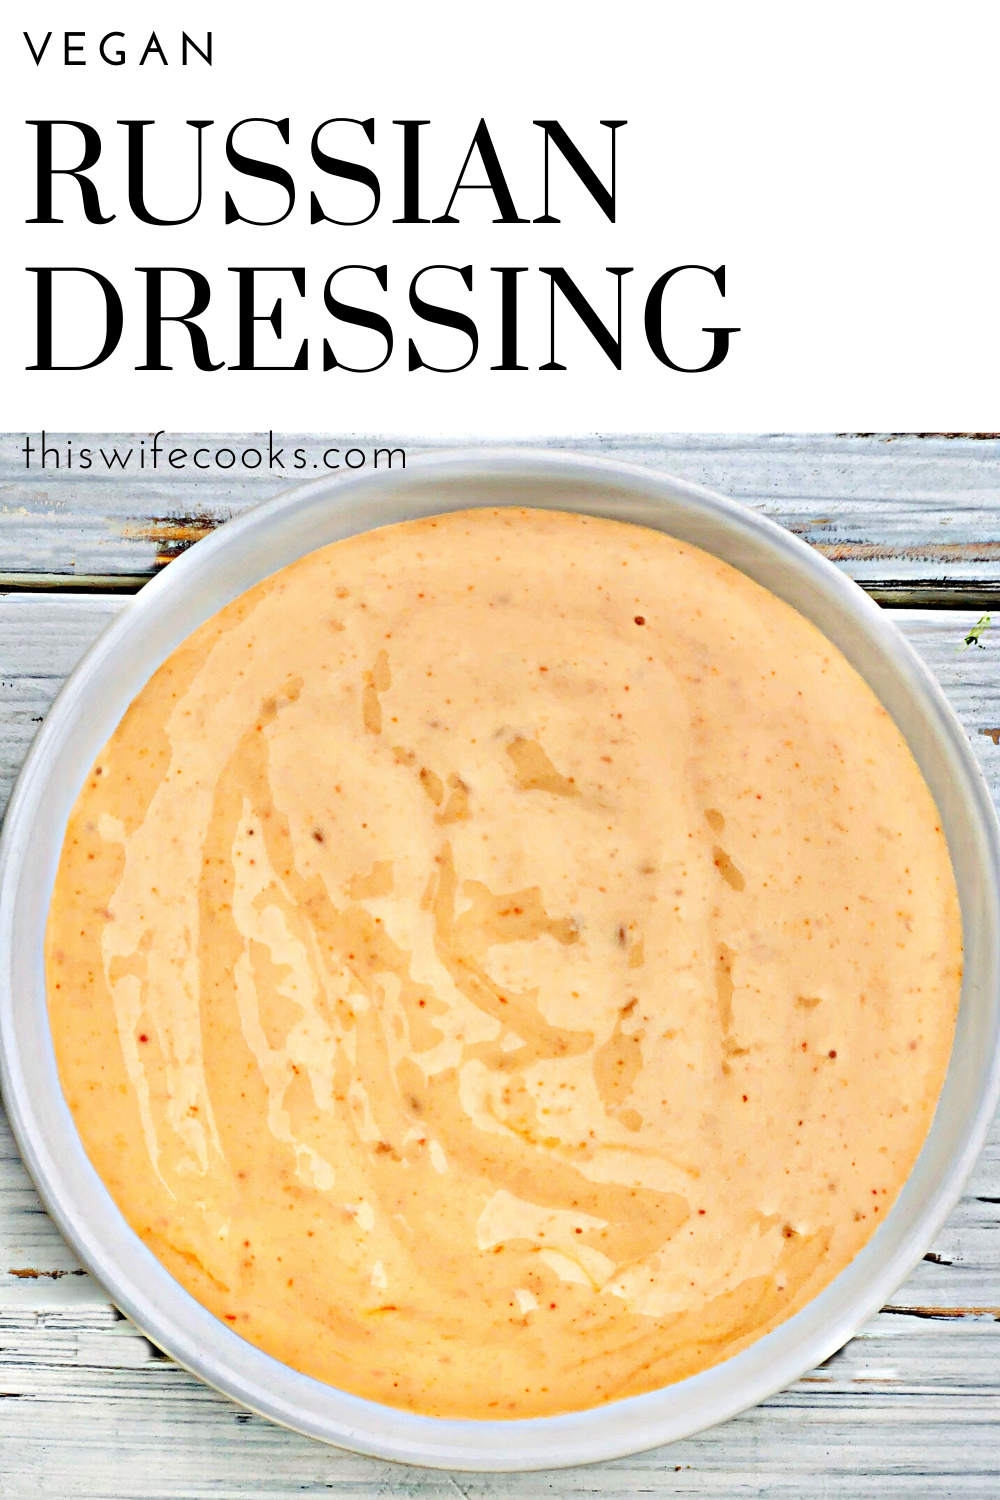 Vegan Russian Dressing - A dairy-free version of the classic dressing and sandwich spread!

#vegansaladdressing #dairyfreesaladdressing #thiswifecooksrecipes  via @thiswifecooks